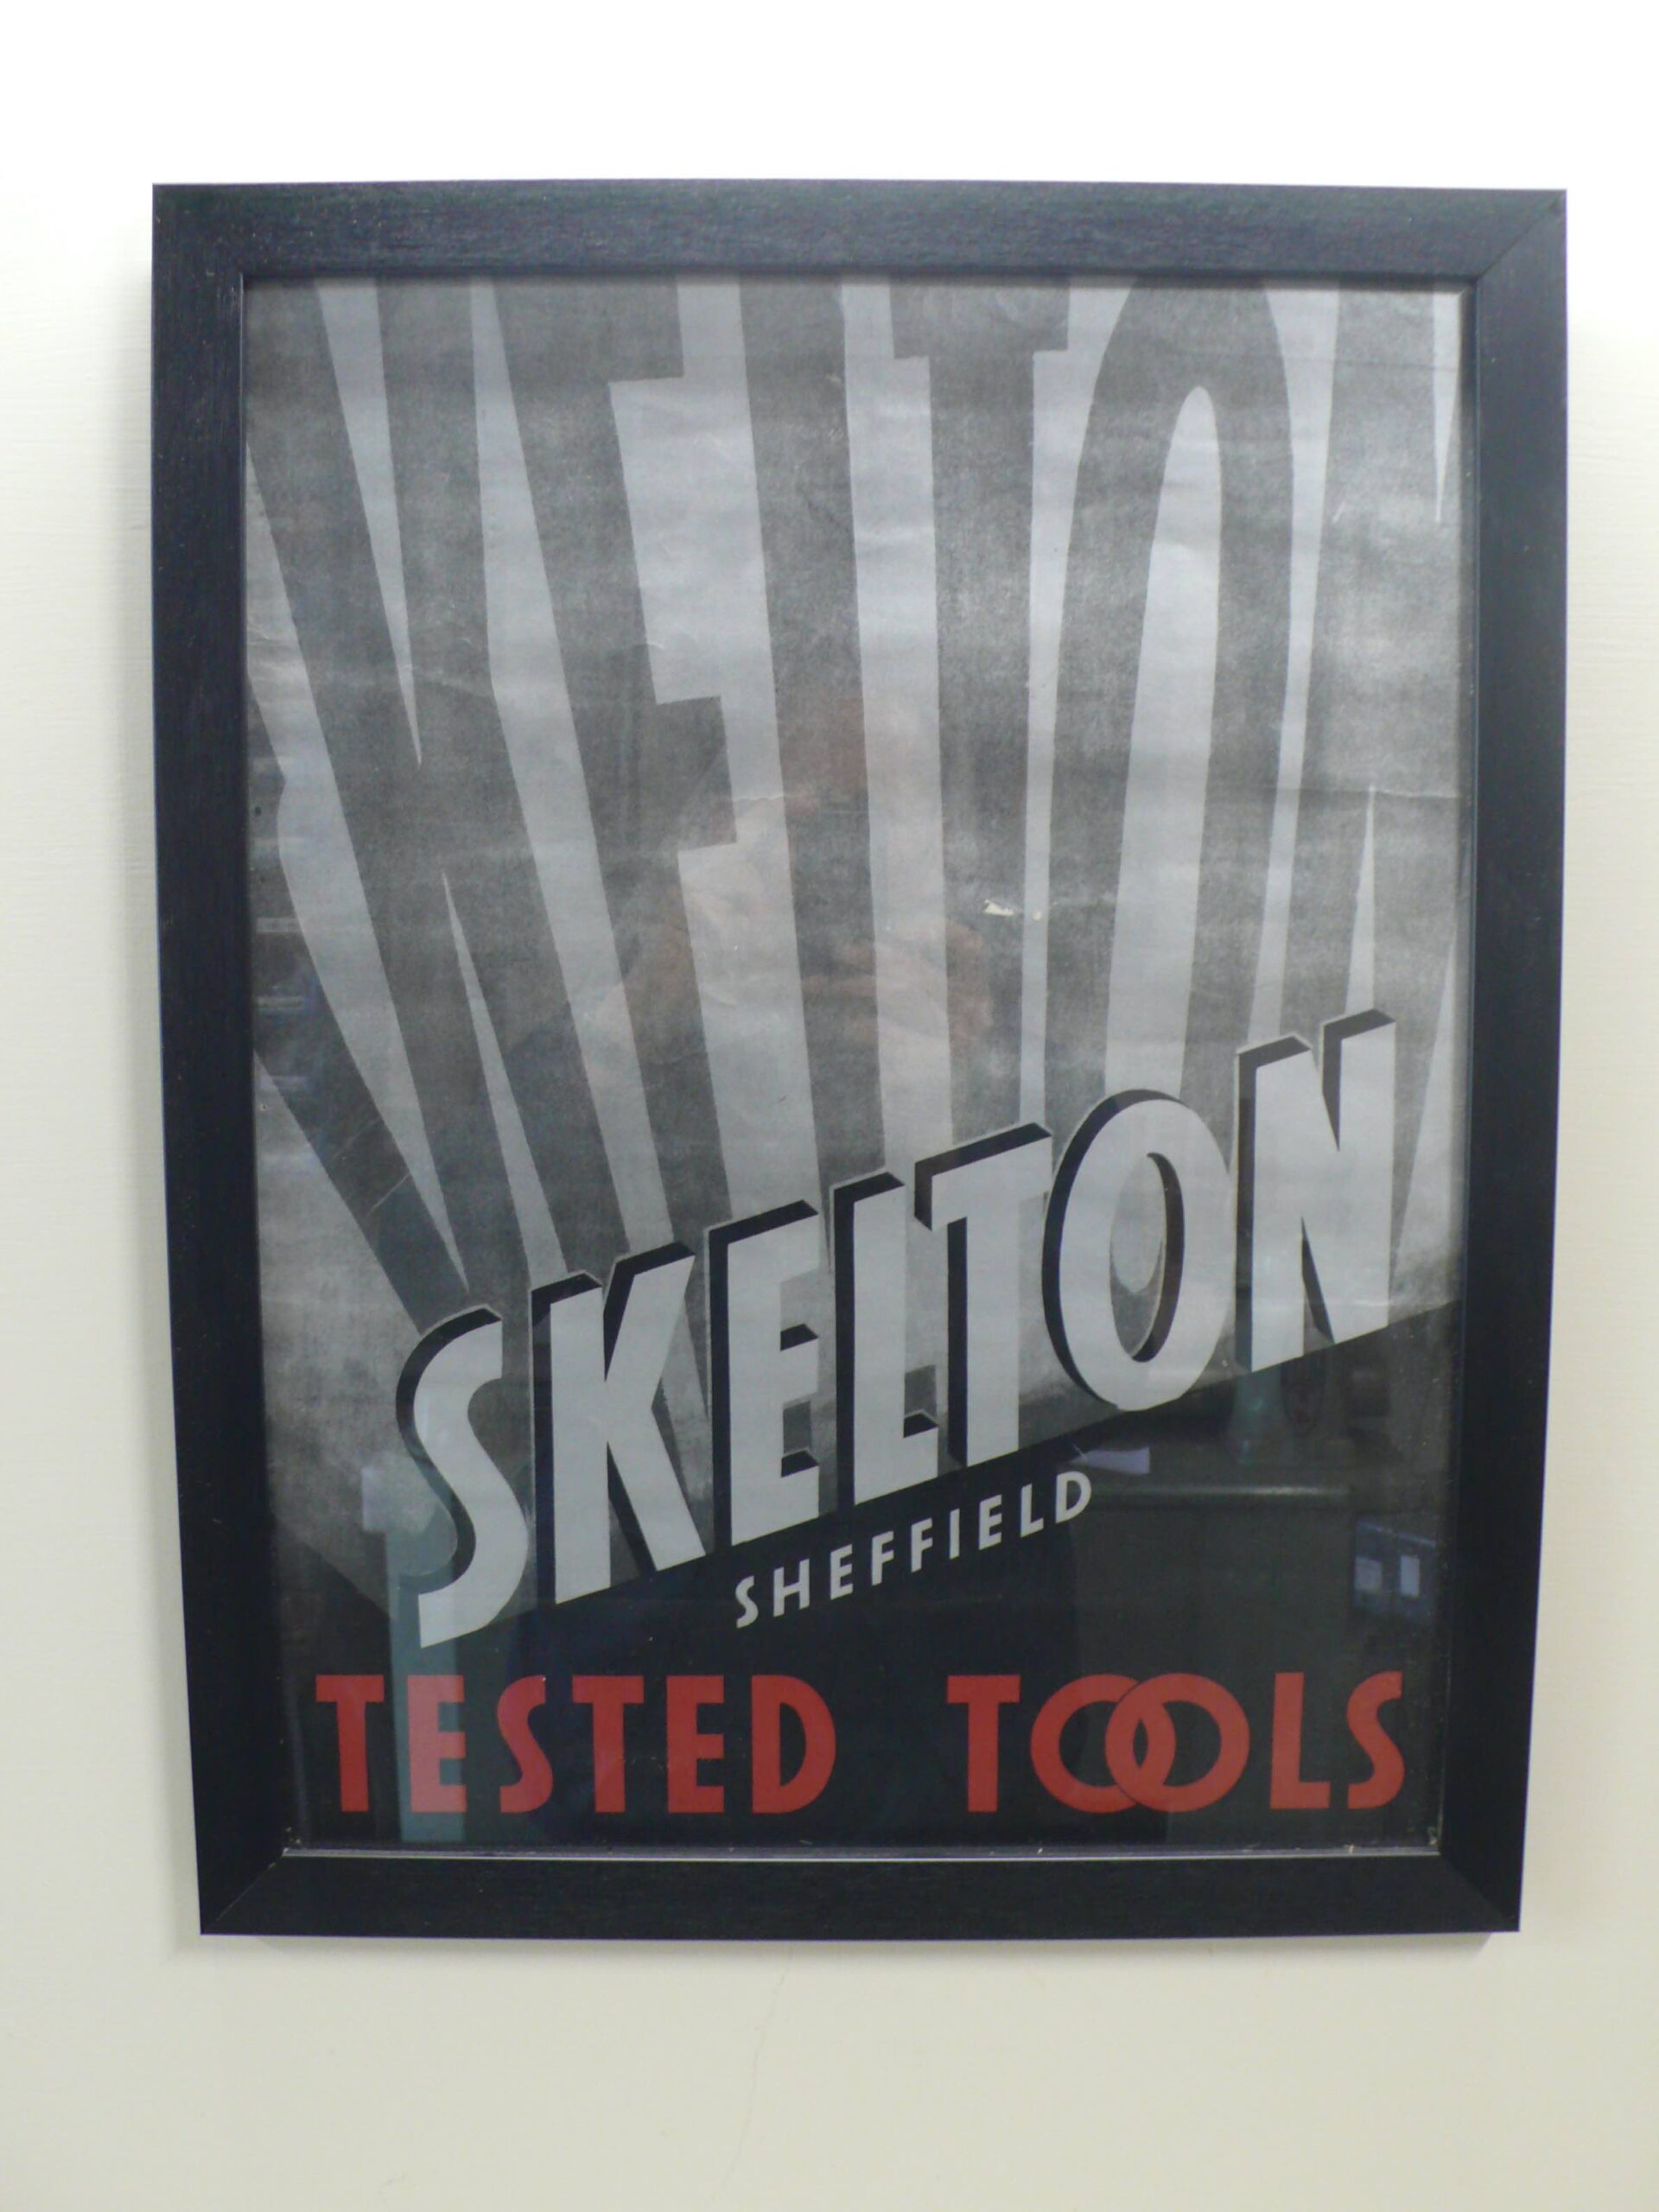 Skelton Tested Tools Poster